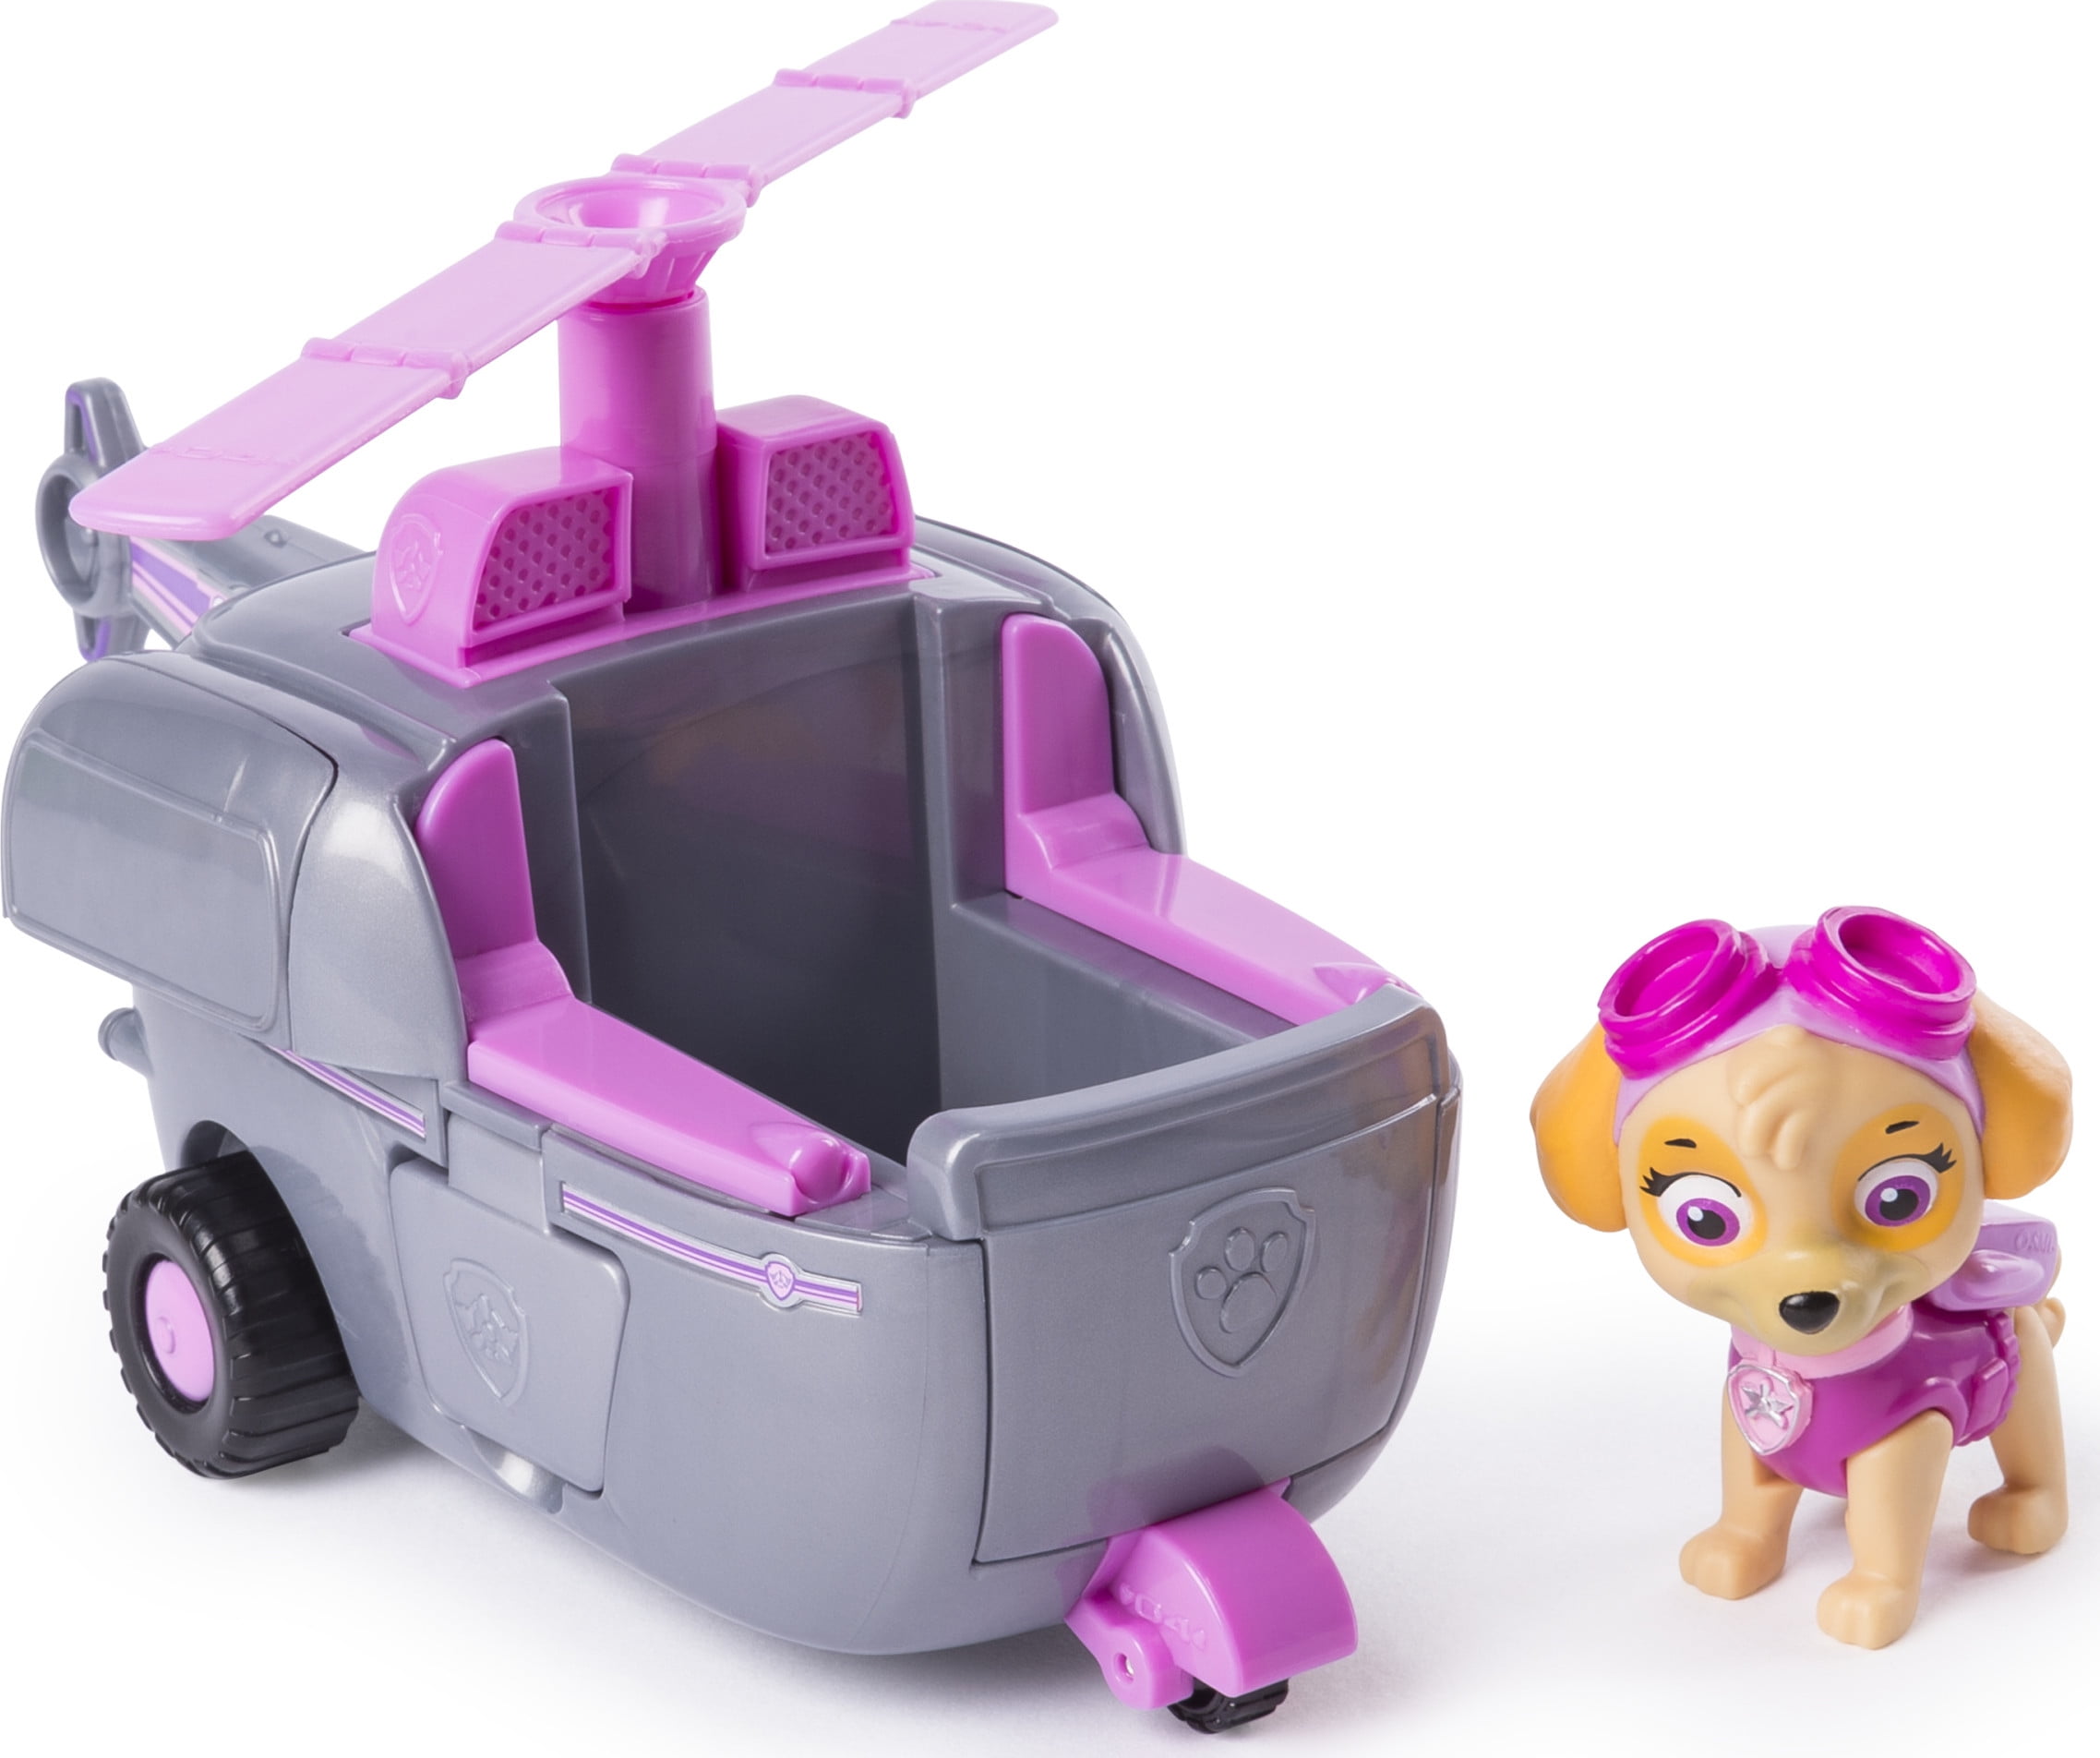 Paw Patrol toys Ryder's Rescue ATV Vehicle and Figure figure toy Puppy Dog Toys